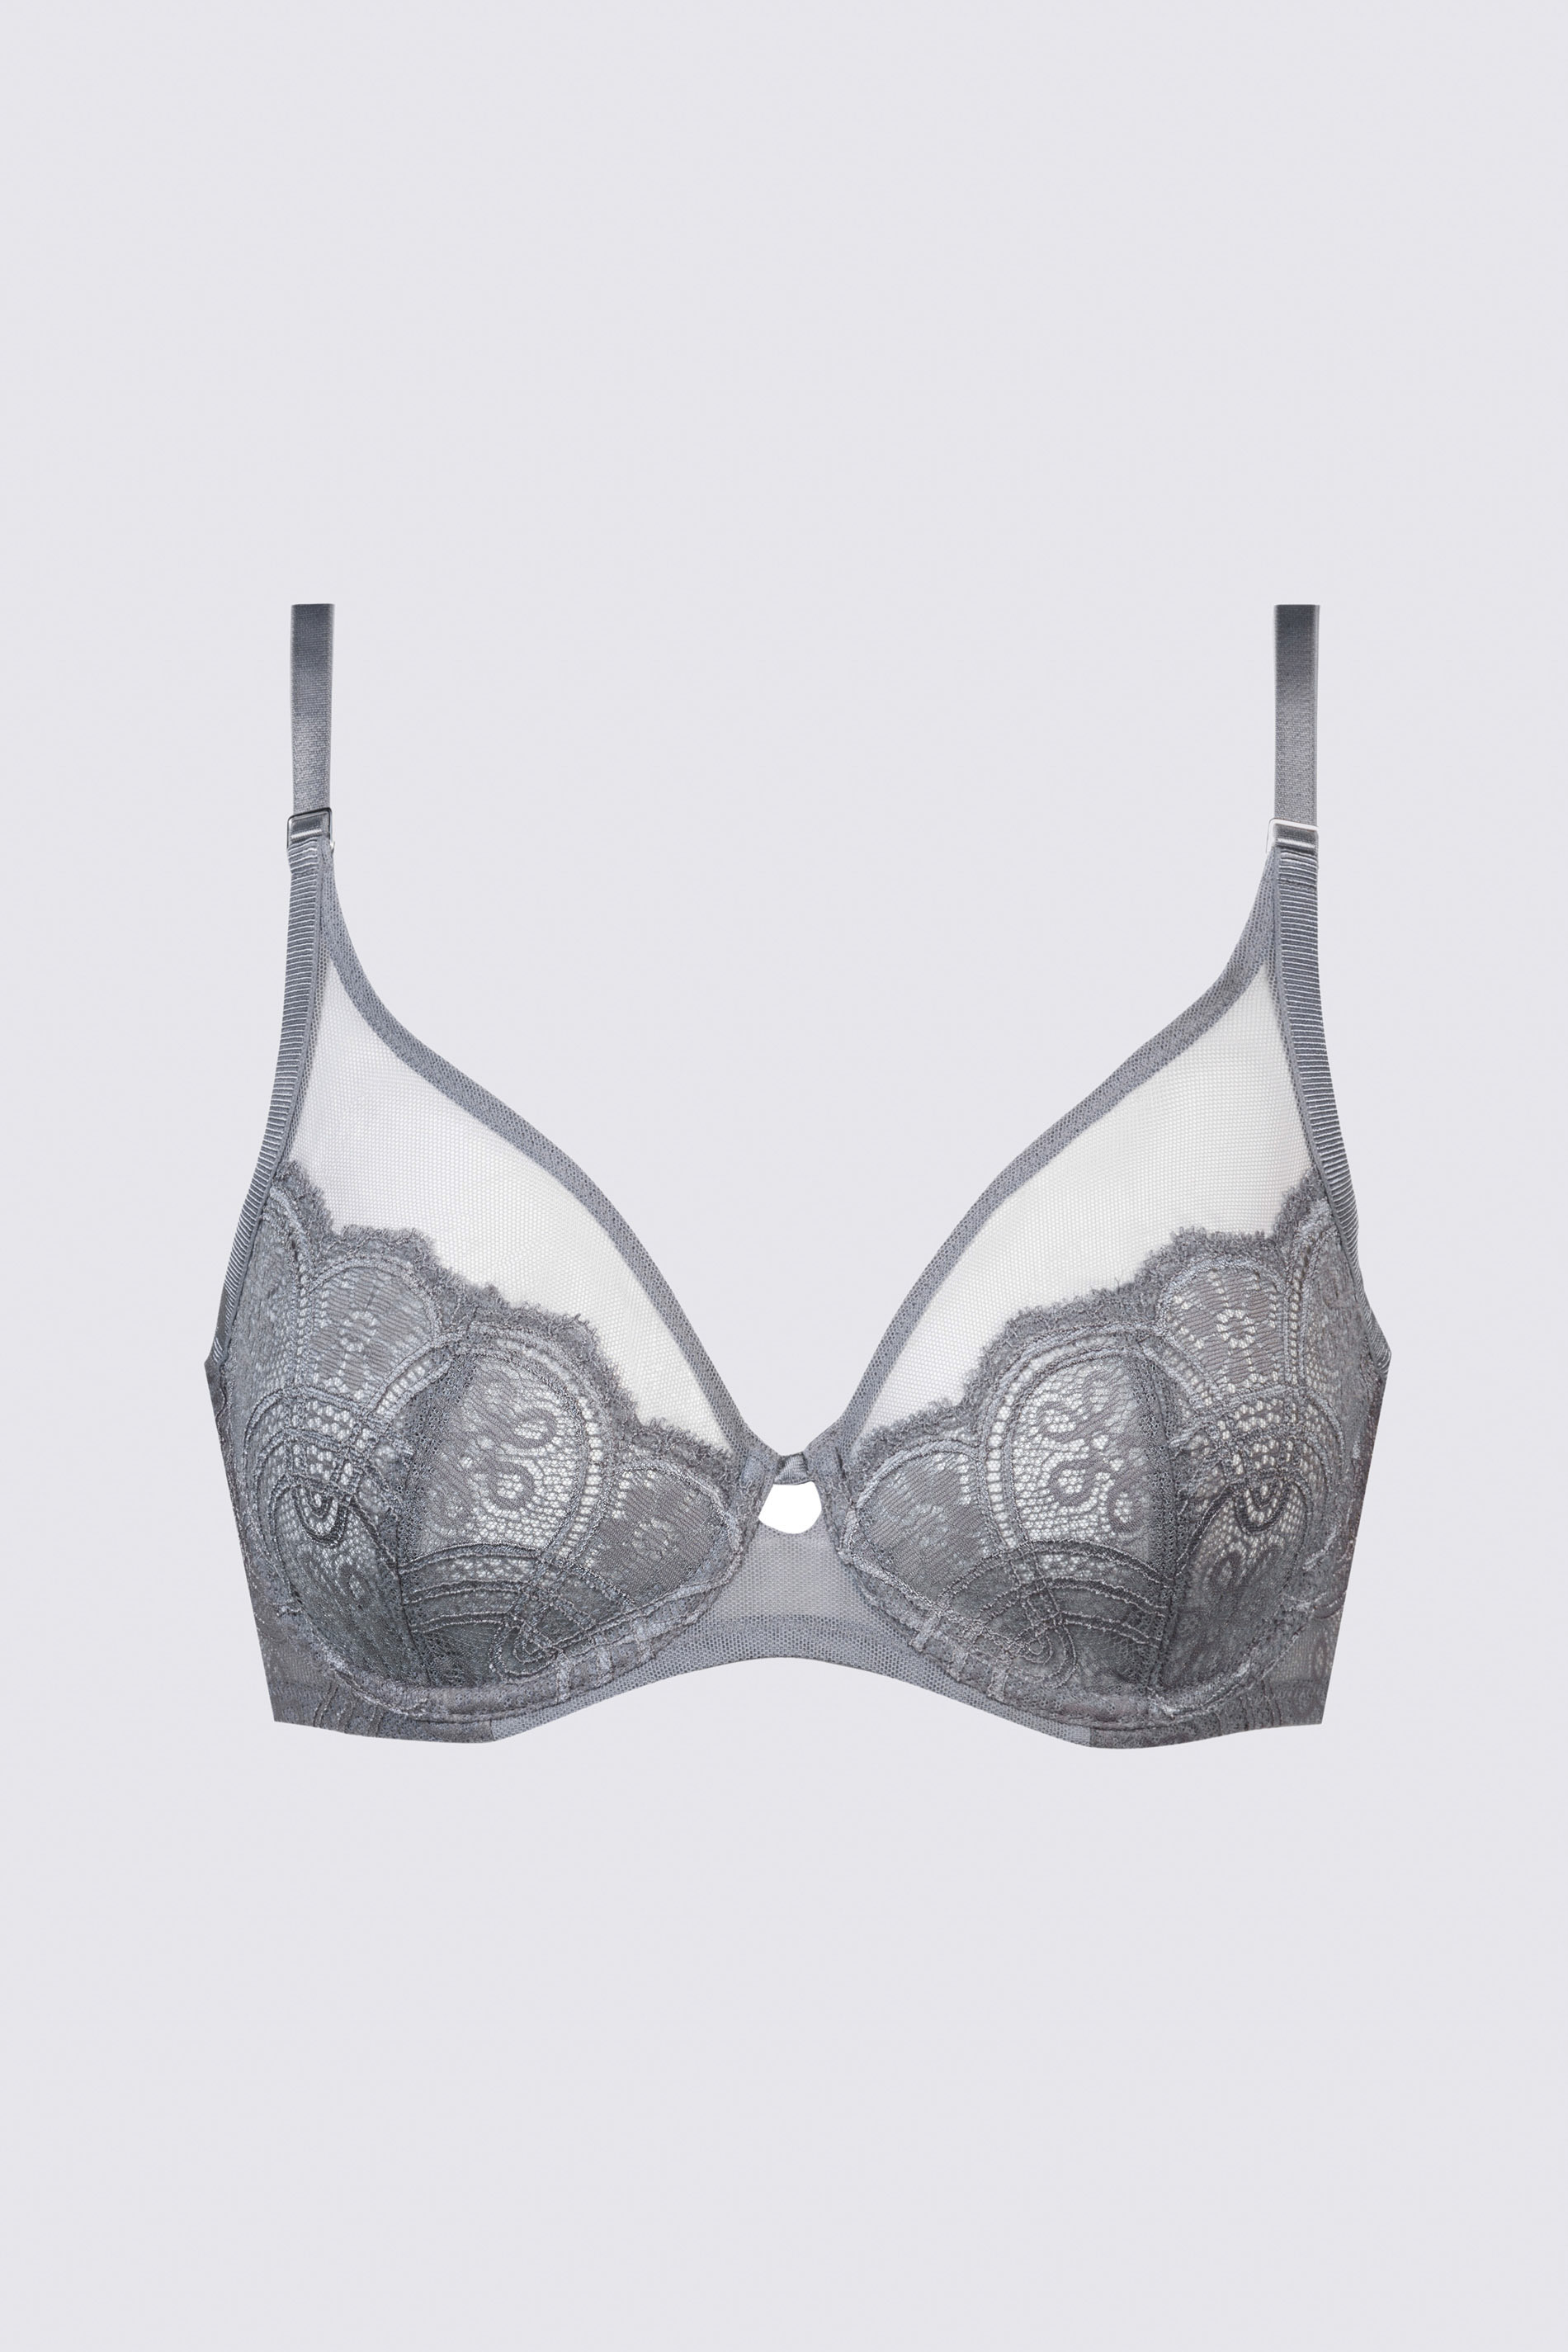 Beugelbeha Lovely Grey Serie Stunning Uitknippen | mey®